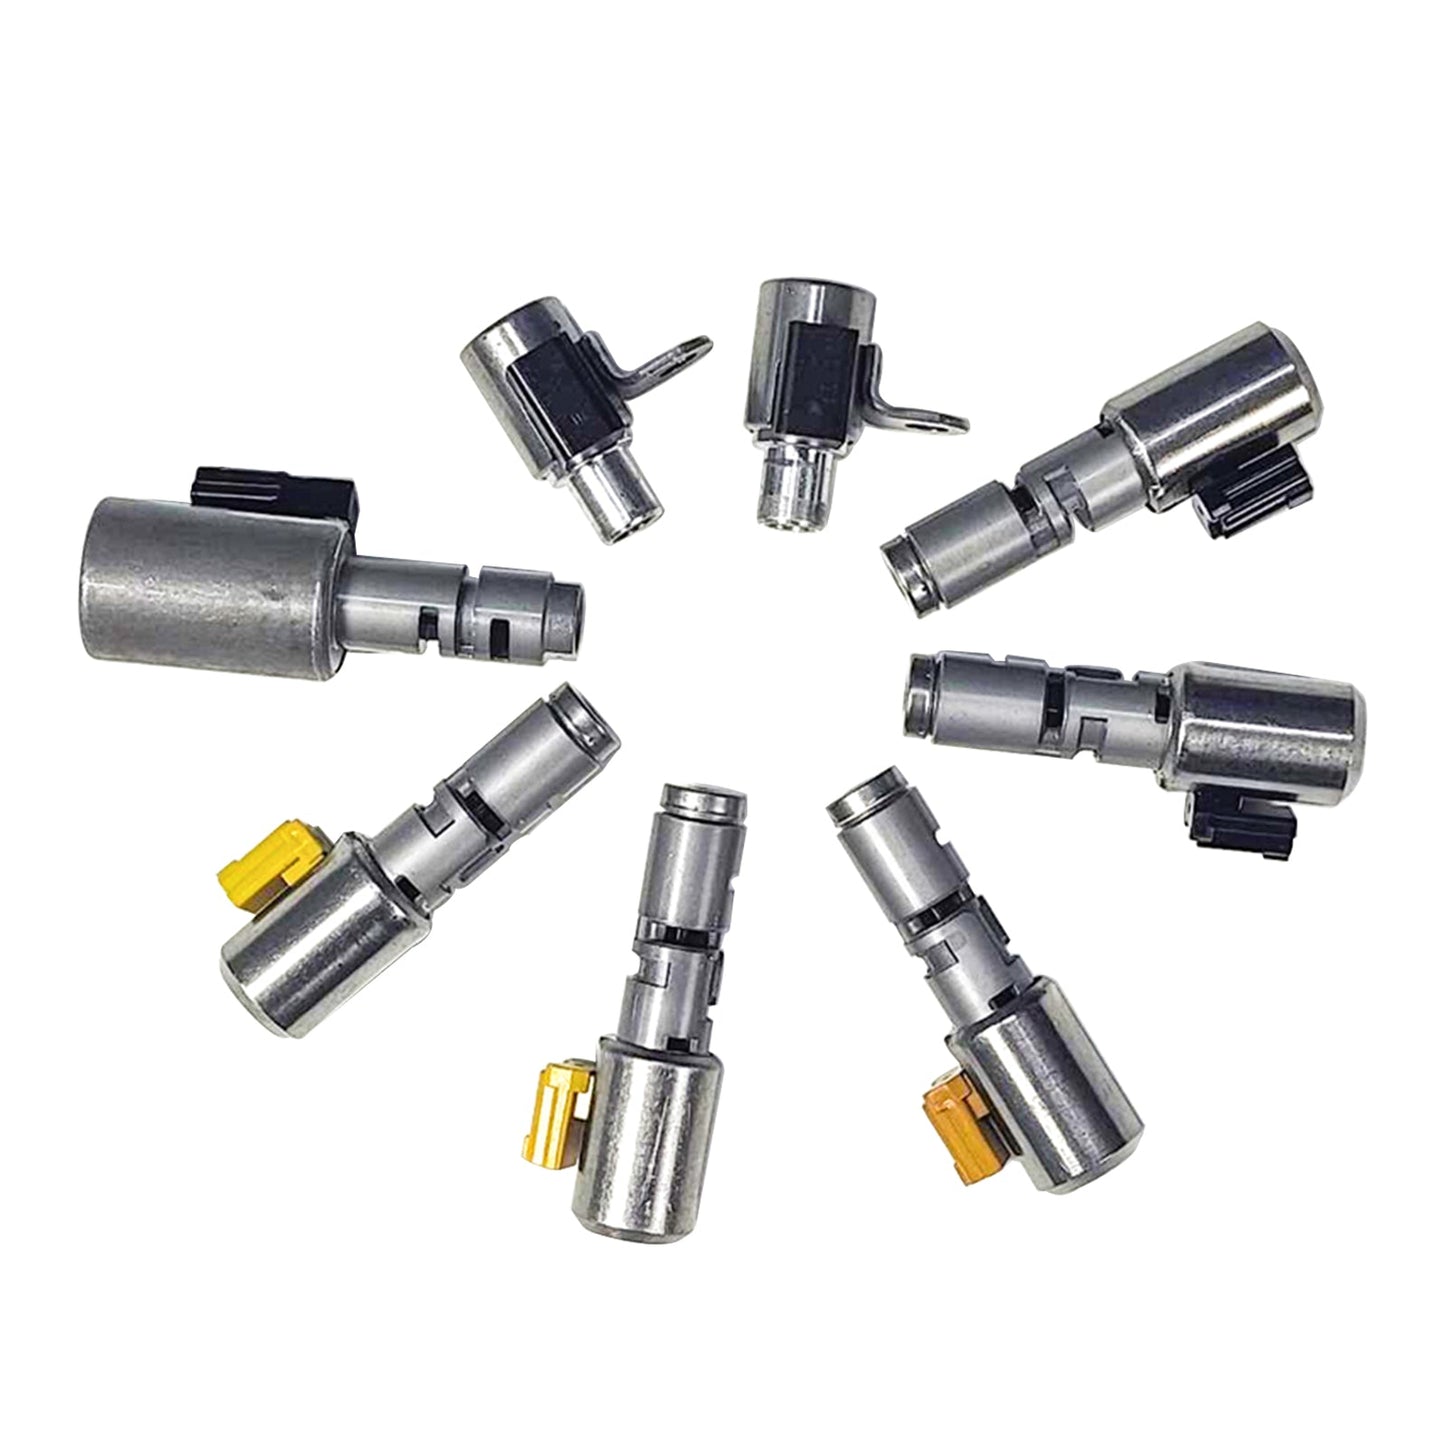 Volkswage-n Beetle /Beetle Convertible 2003-Up 6 Speed FWD TF60SN 09G Transmission Solenoid Kit Small Valve 6PCS 1298152